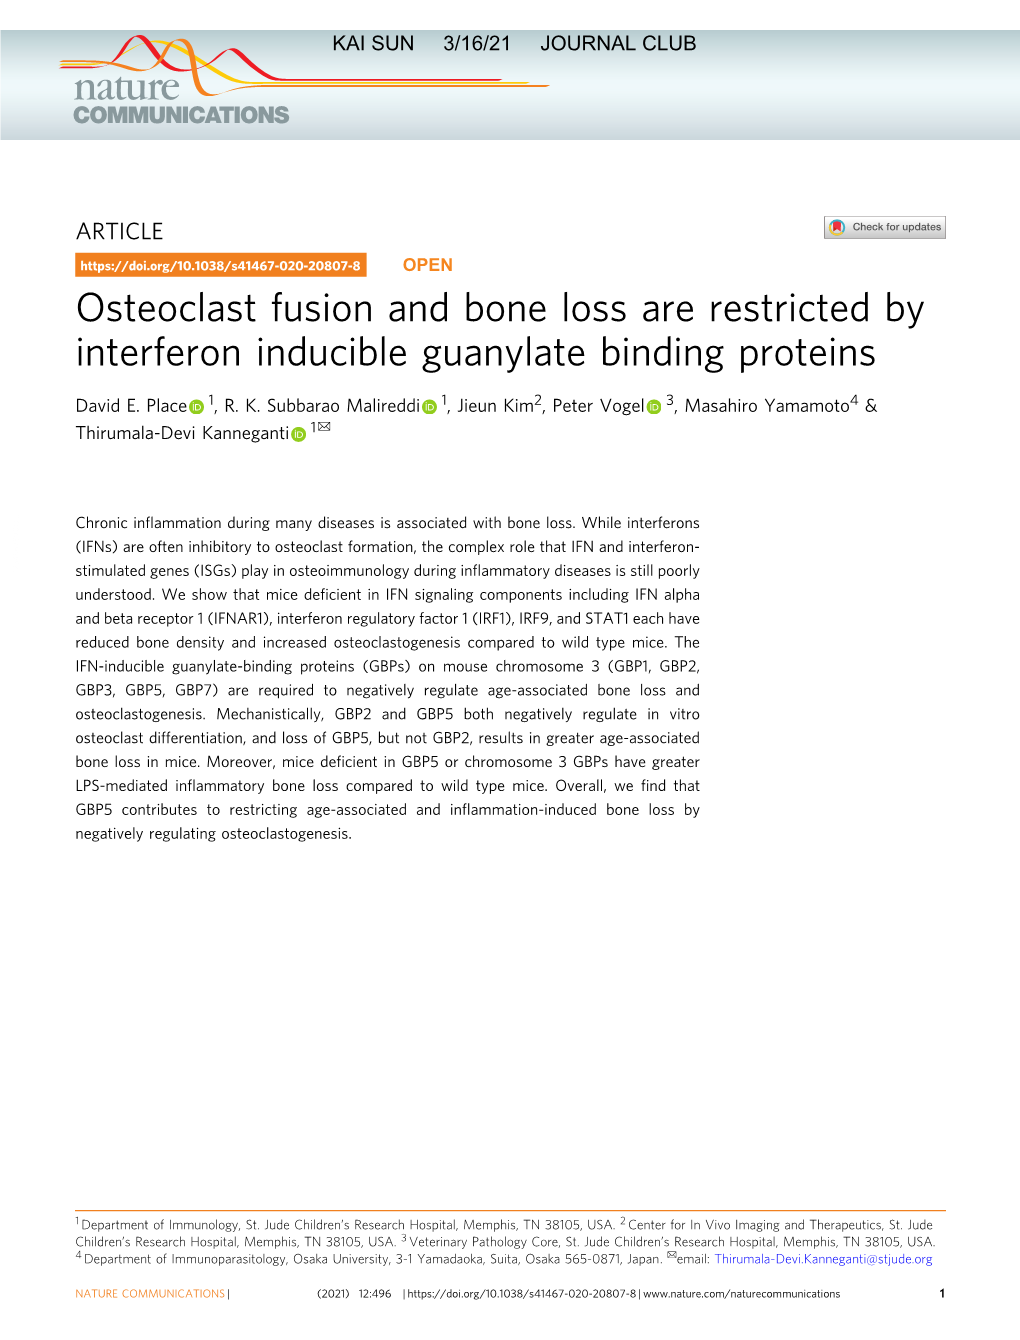 Osteoclast Fusion and Bone Loss Are Restricted by Interferon Inducible Guanylate Binding Proteins